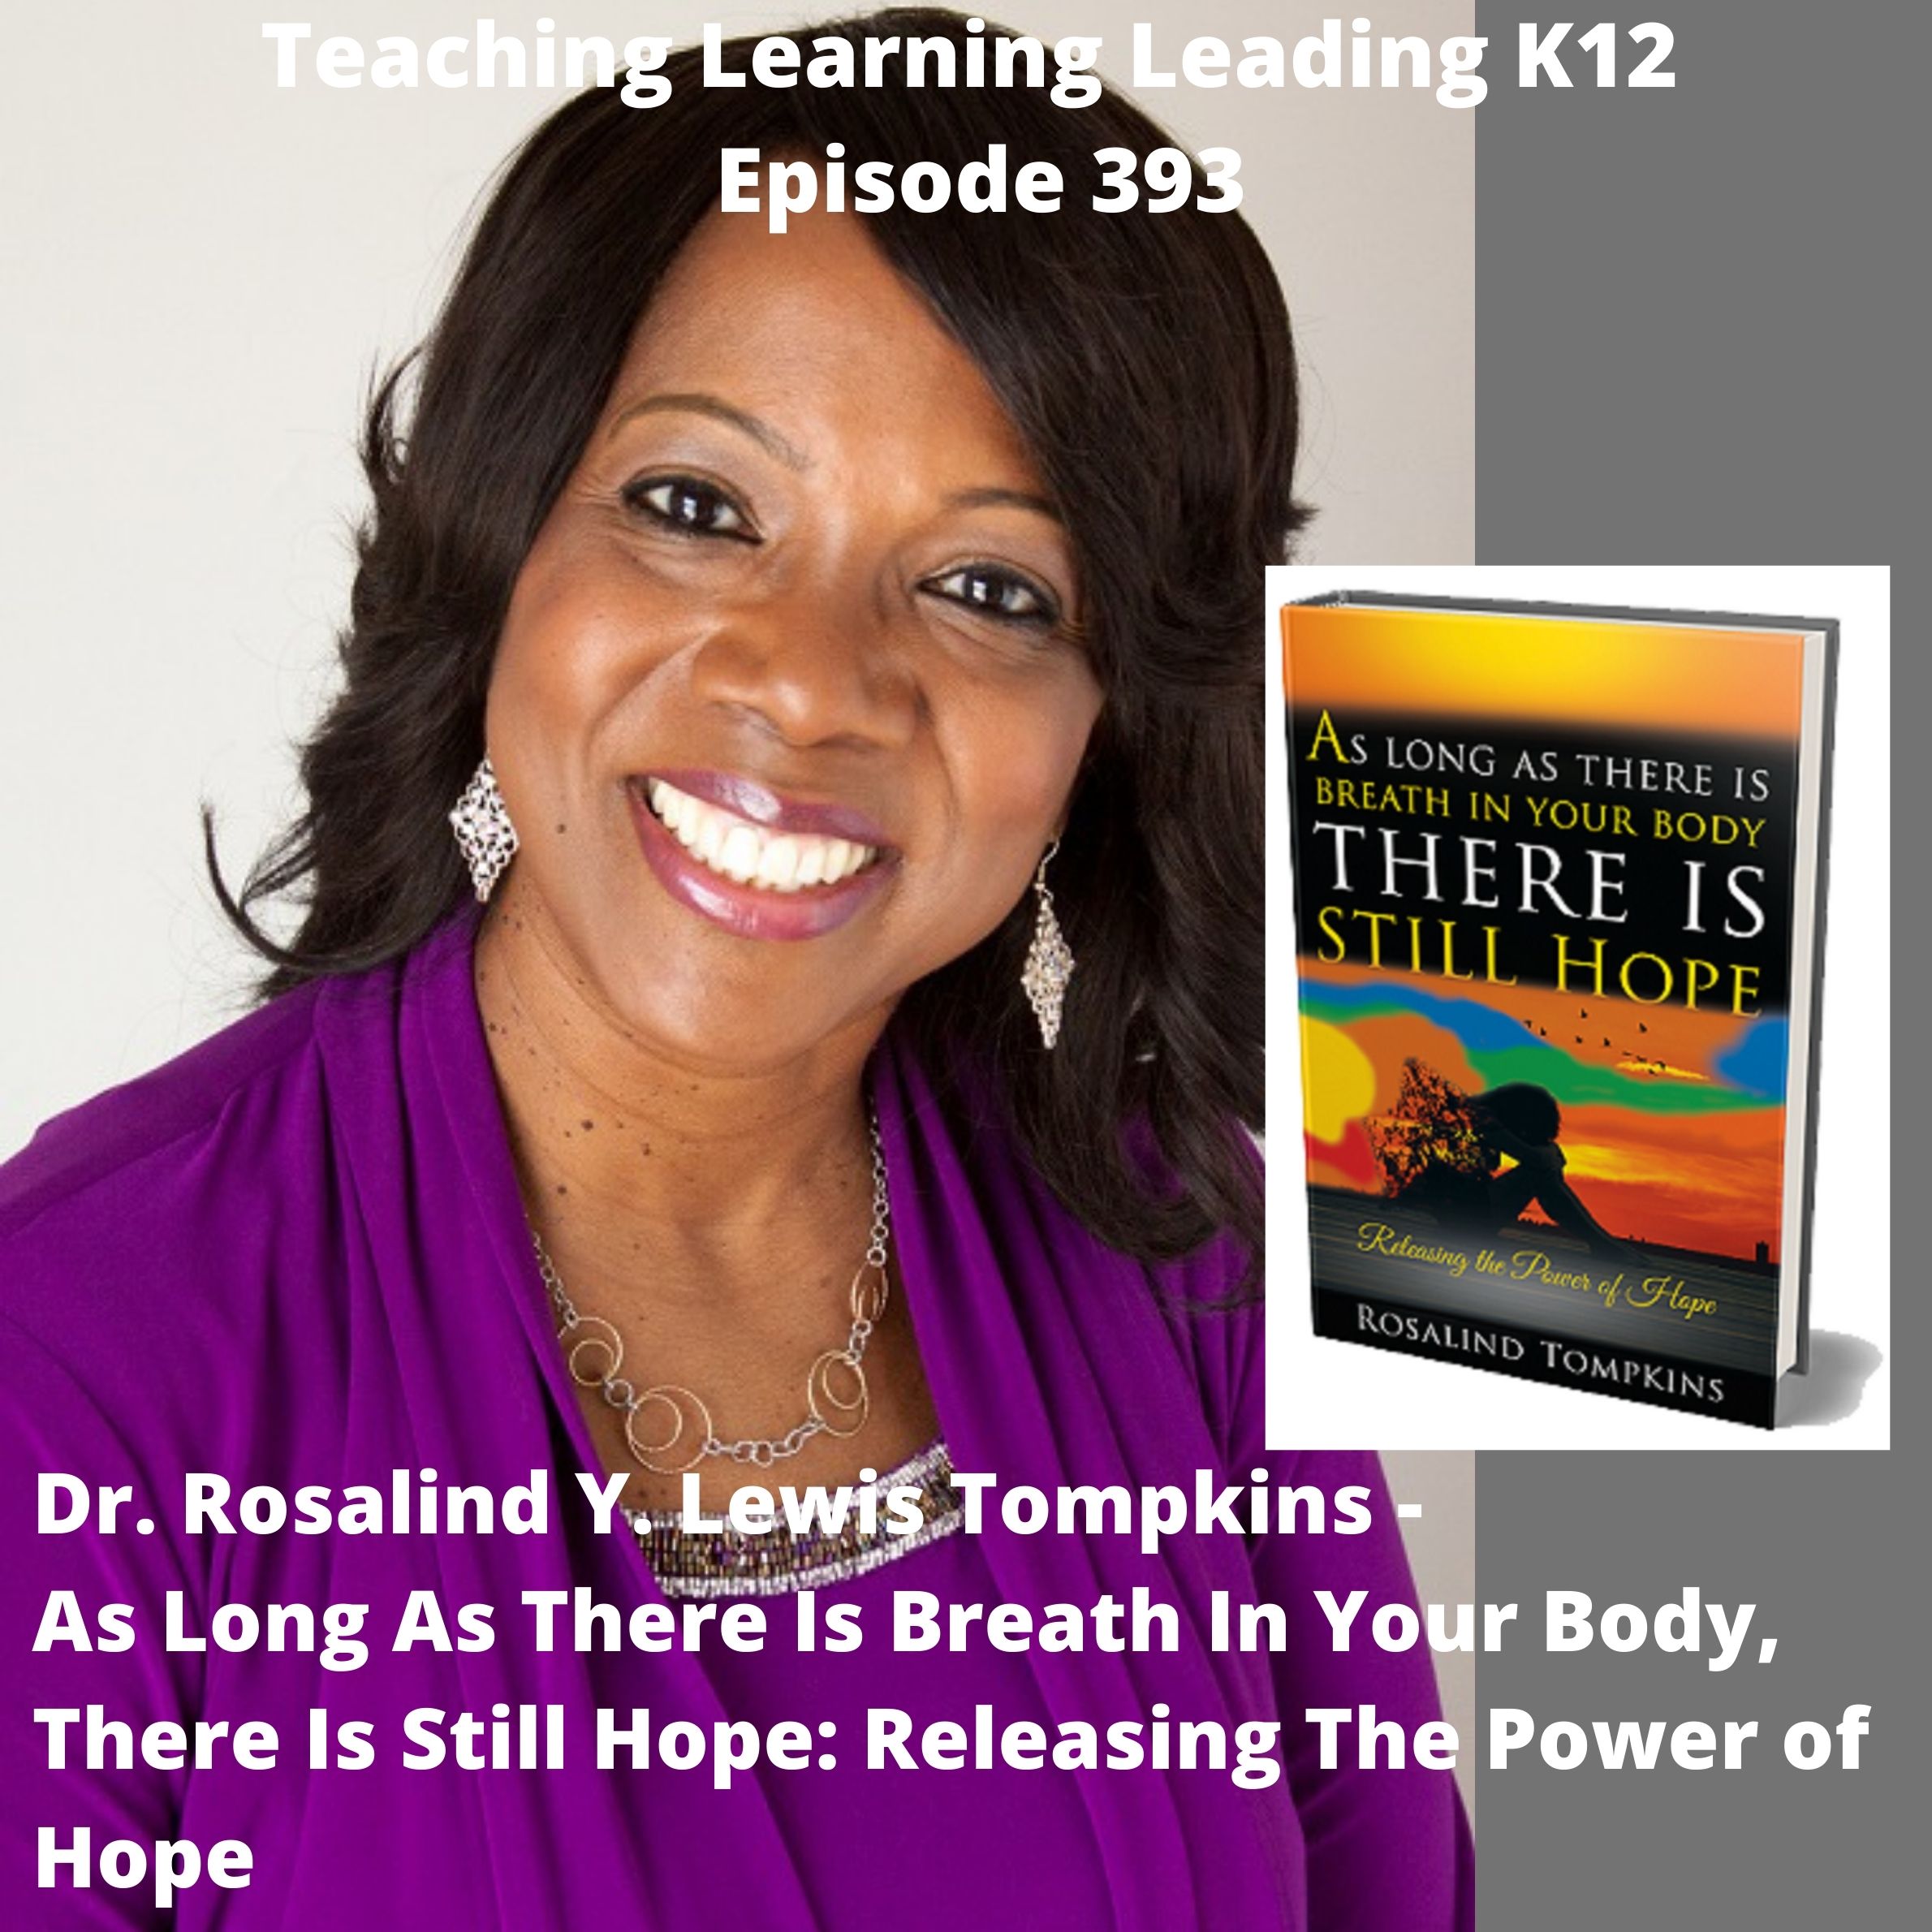 Dr. Rosalind Y. Lewis Tompkins - As Long As There is Breath in Your Body, There is Still Hope: Releasing the Power of Hope - 393 Image